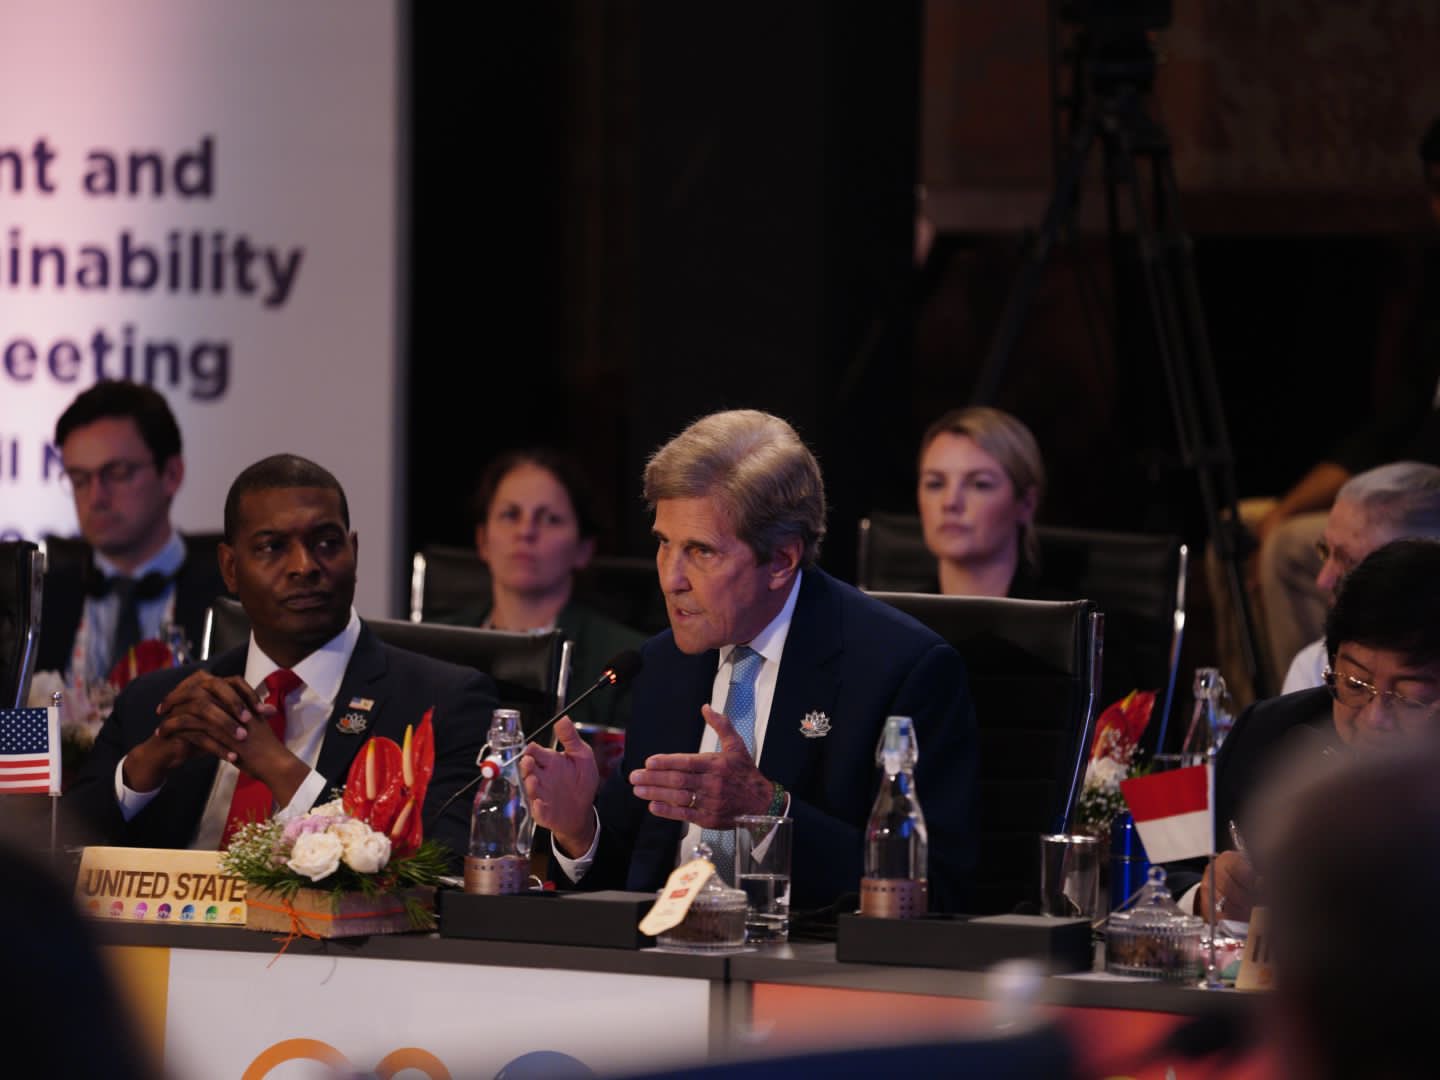 John Kerry, climate envoy from the US, speaking from his seat to a hall of climate ministers from G20 countries